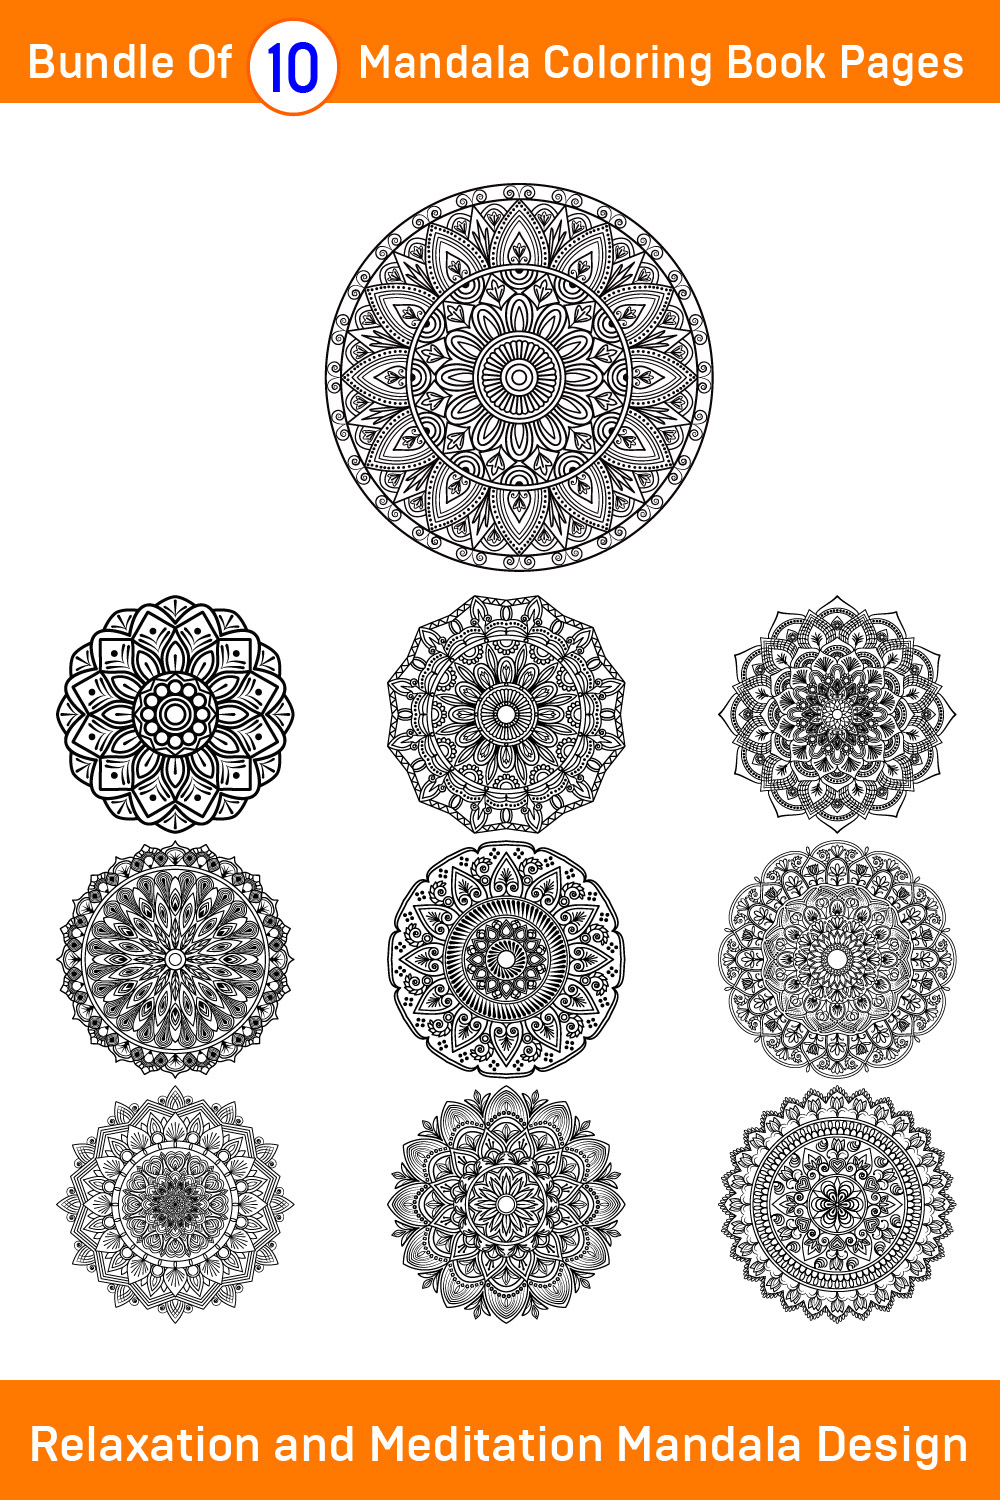 Bundle of 10 Relaxation and Meditation Mandala Coloring Book Pages pinterest preview image.